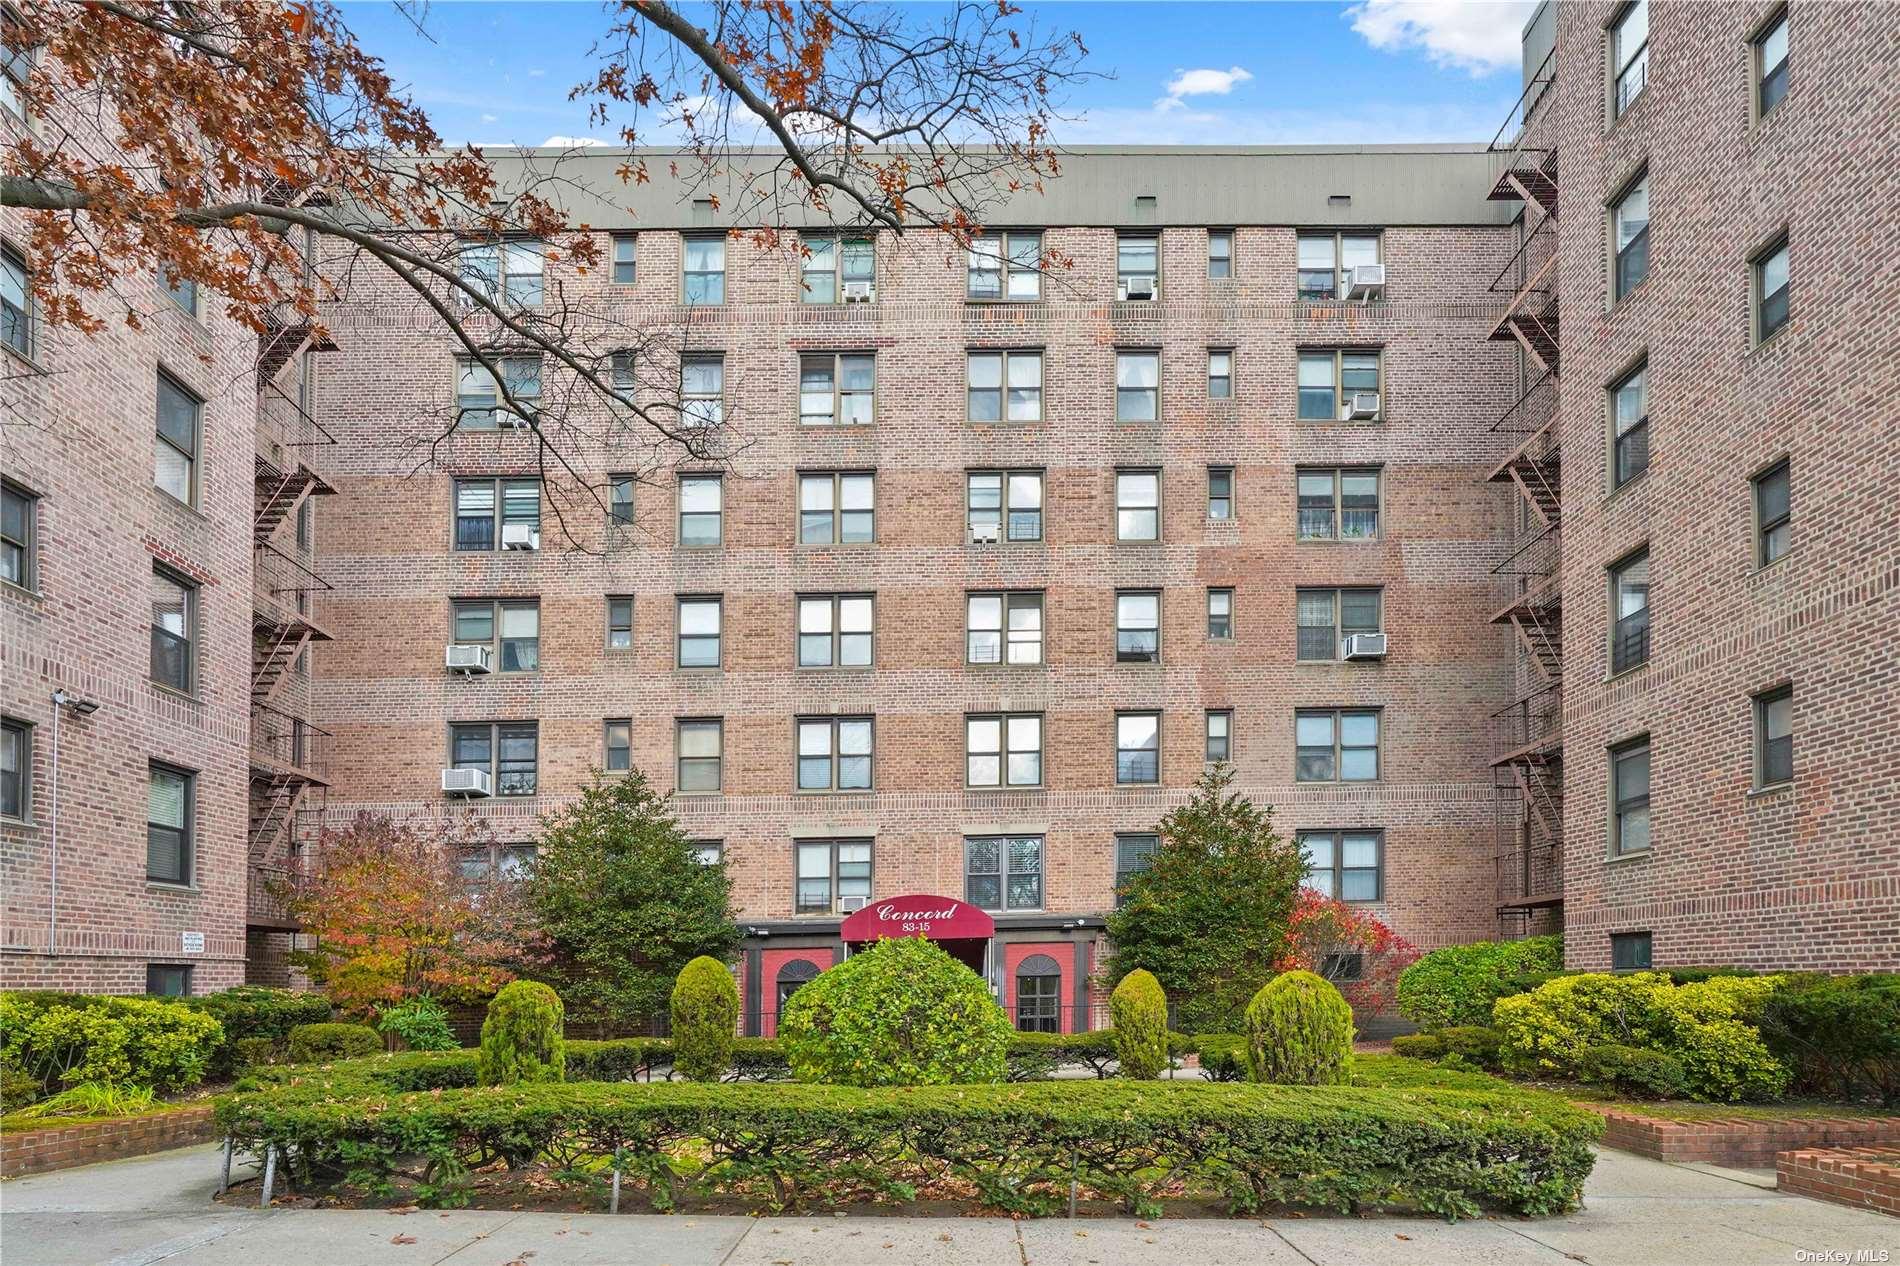 83-15 98 Street #3M in Queens, Woodhaven, NY 11421